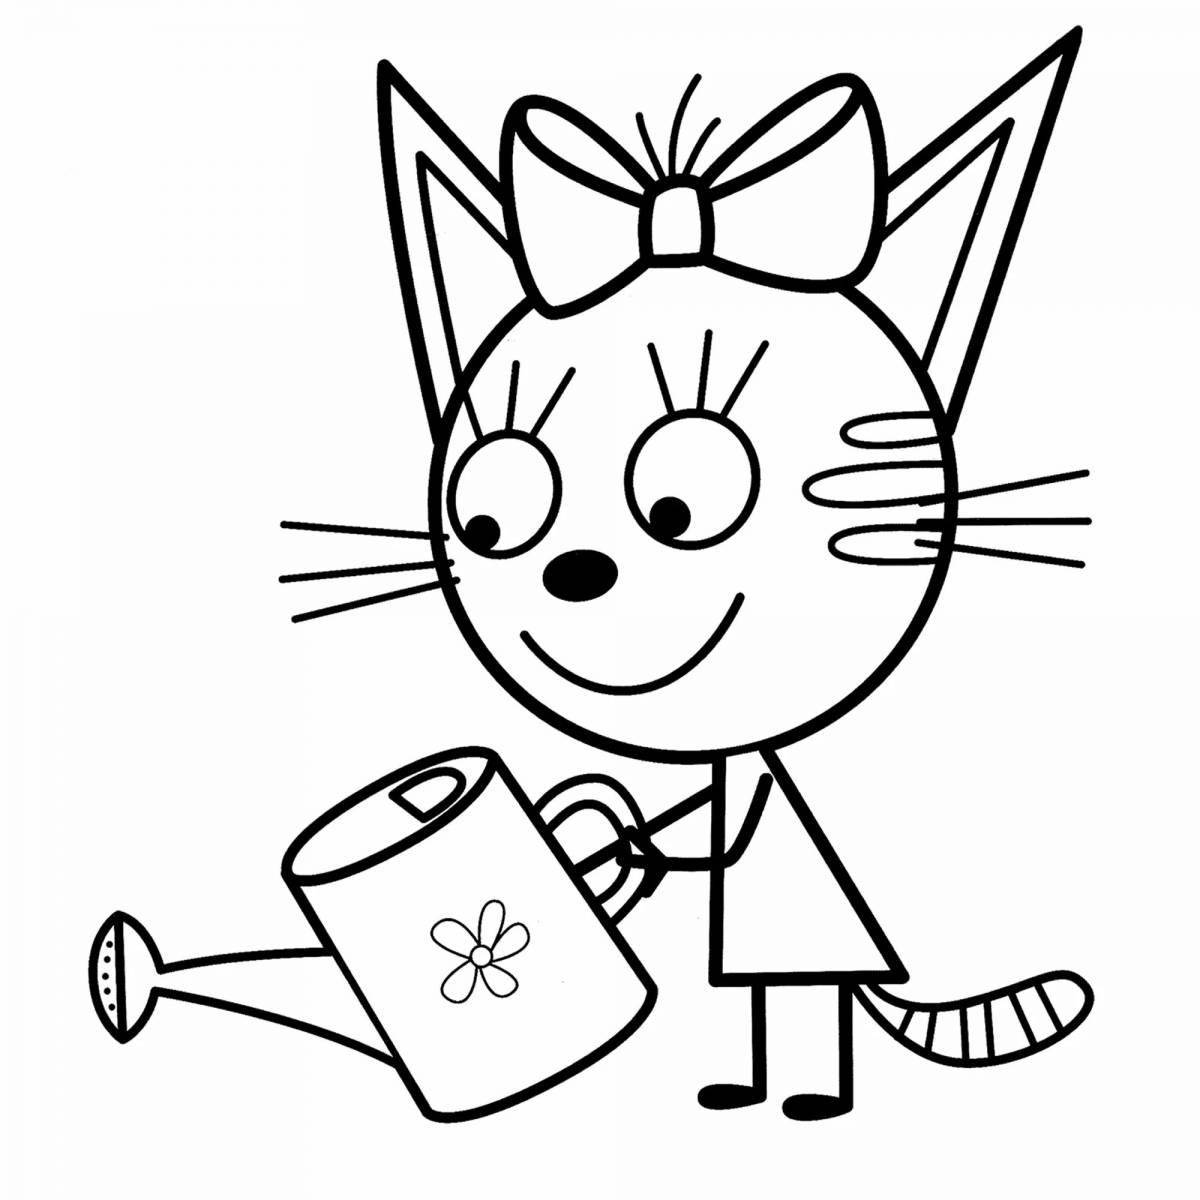 Cute three cats coloring book for kids